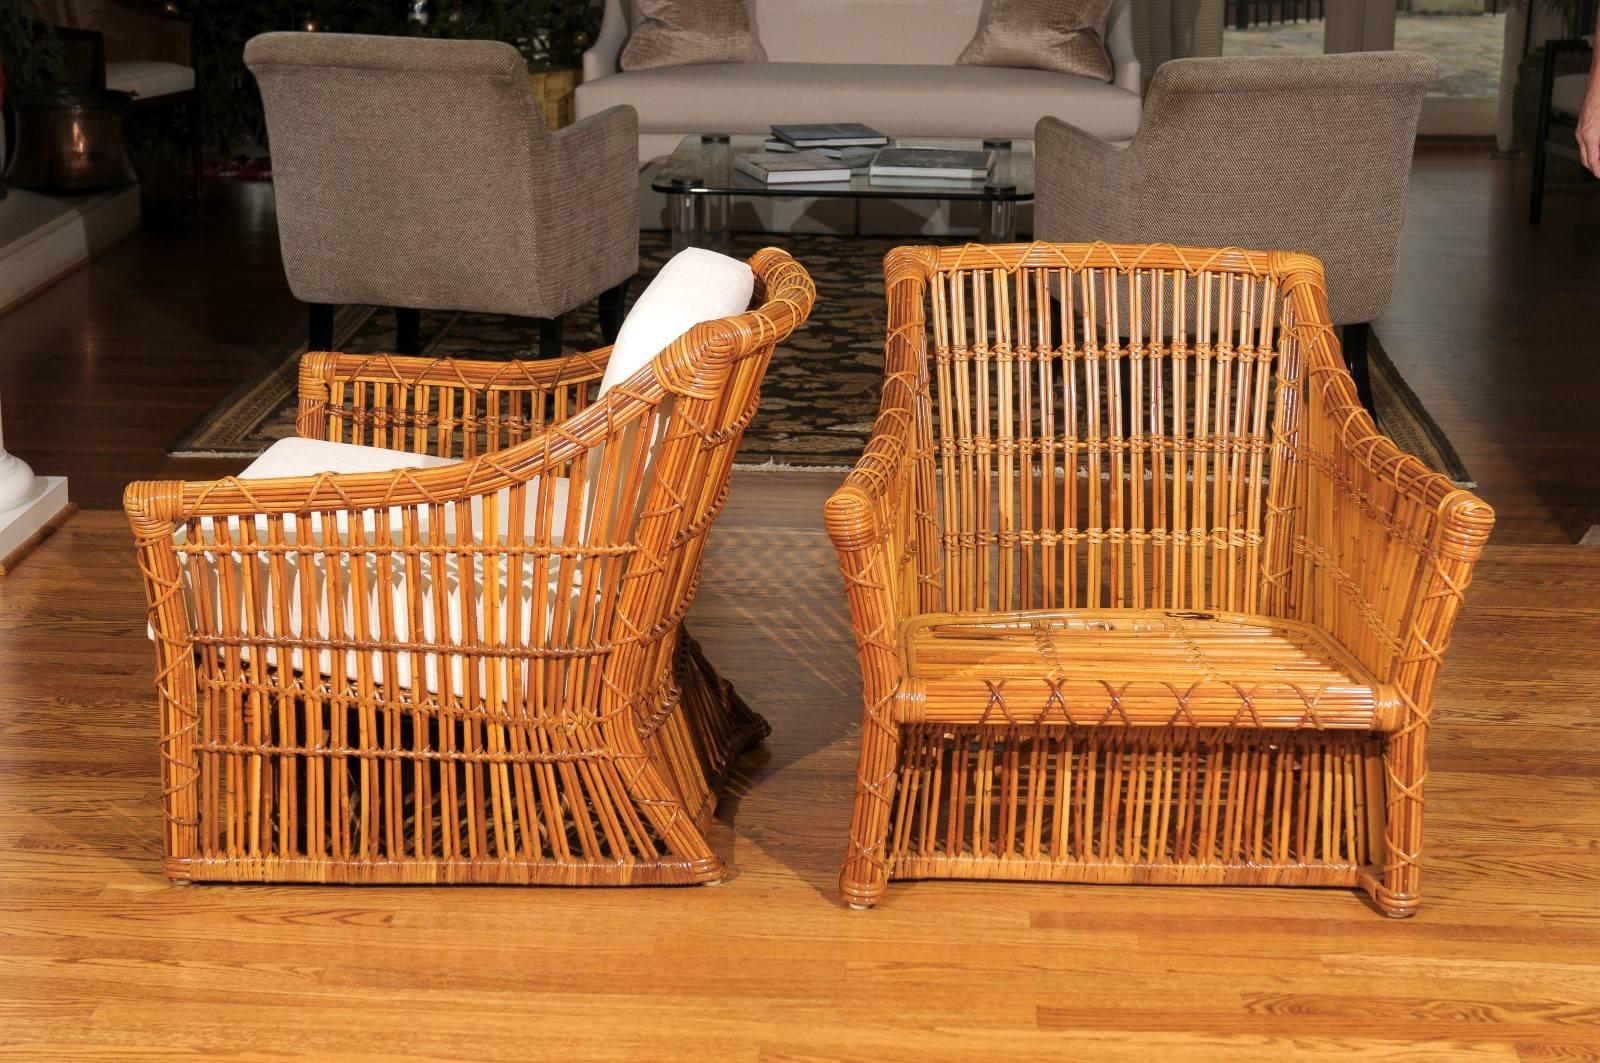 Magnificent Pair of Restored Vintage Rattan Club Chairs by McGuire For Sale 1